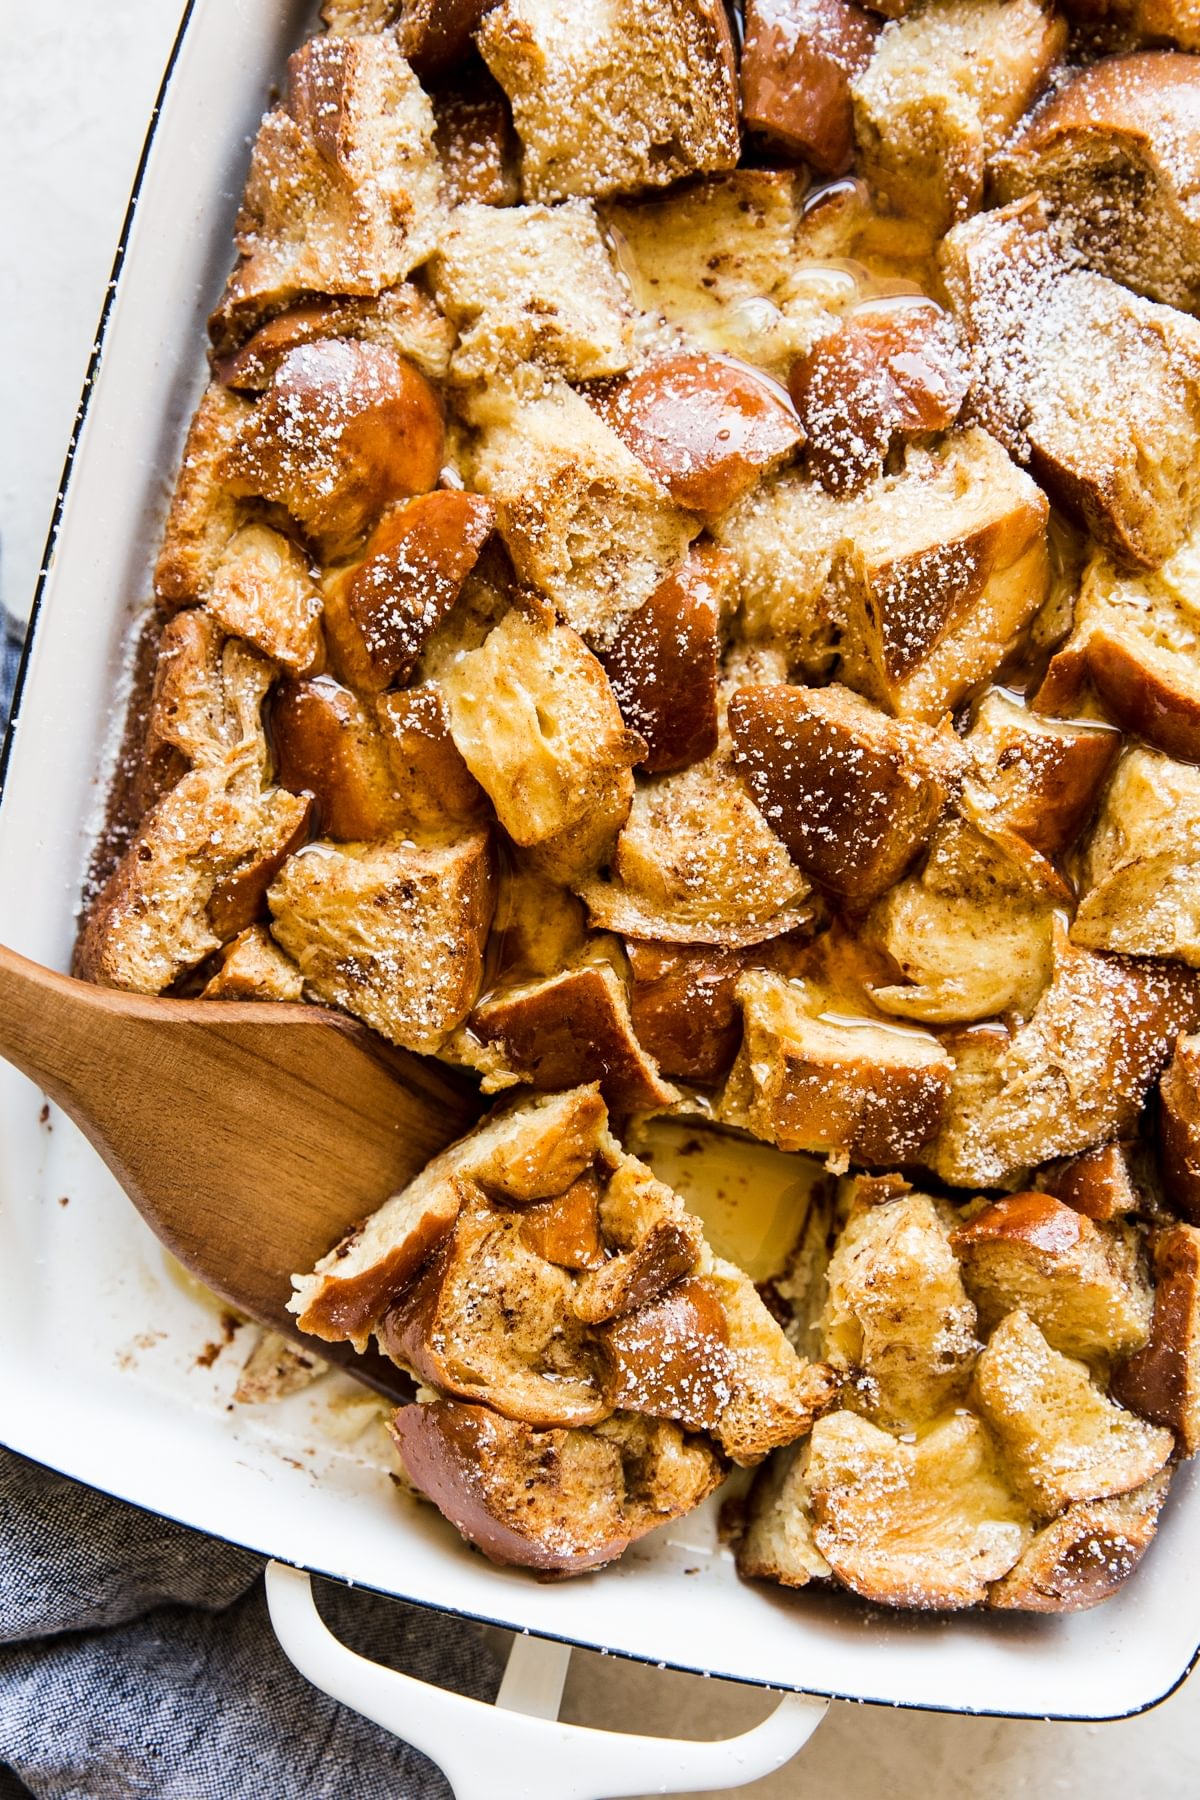 Baked French Toast recipe in a casserole dish with a wooden spoon